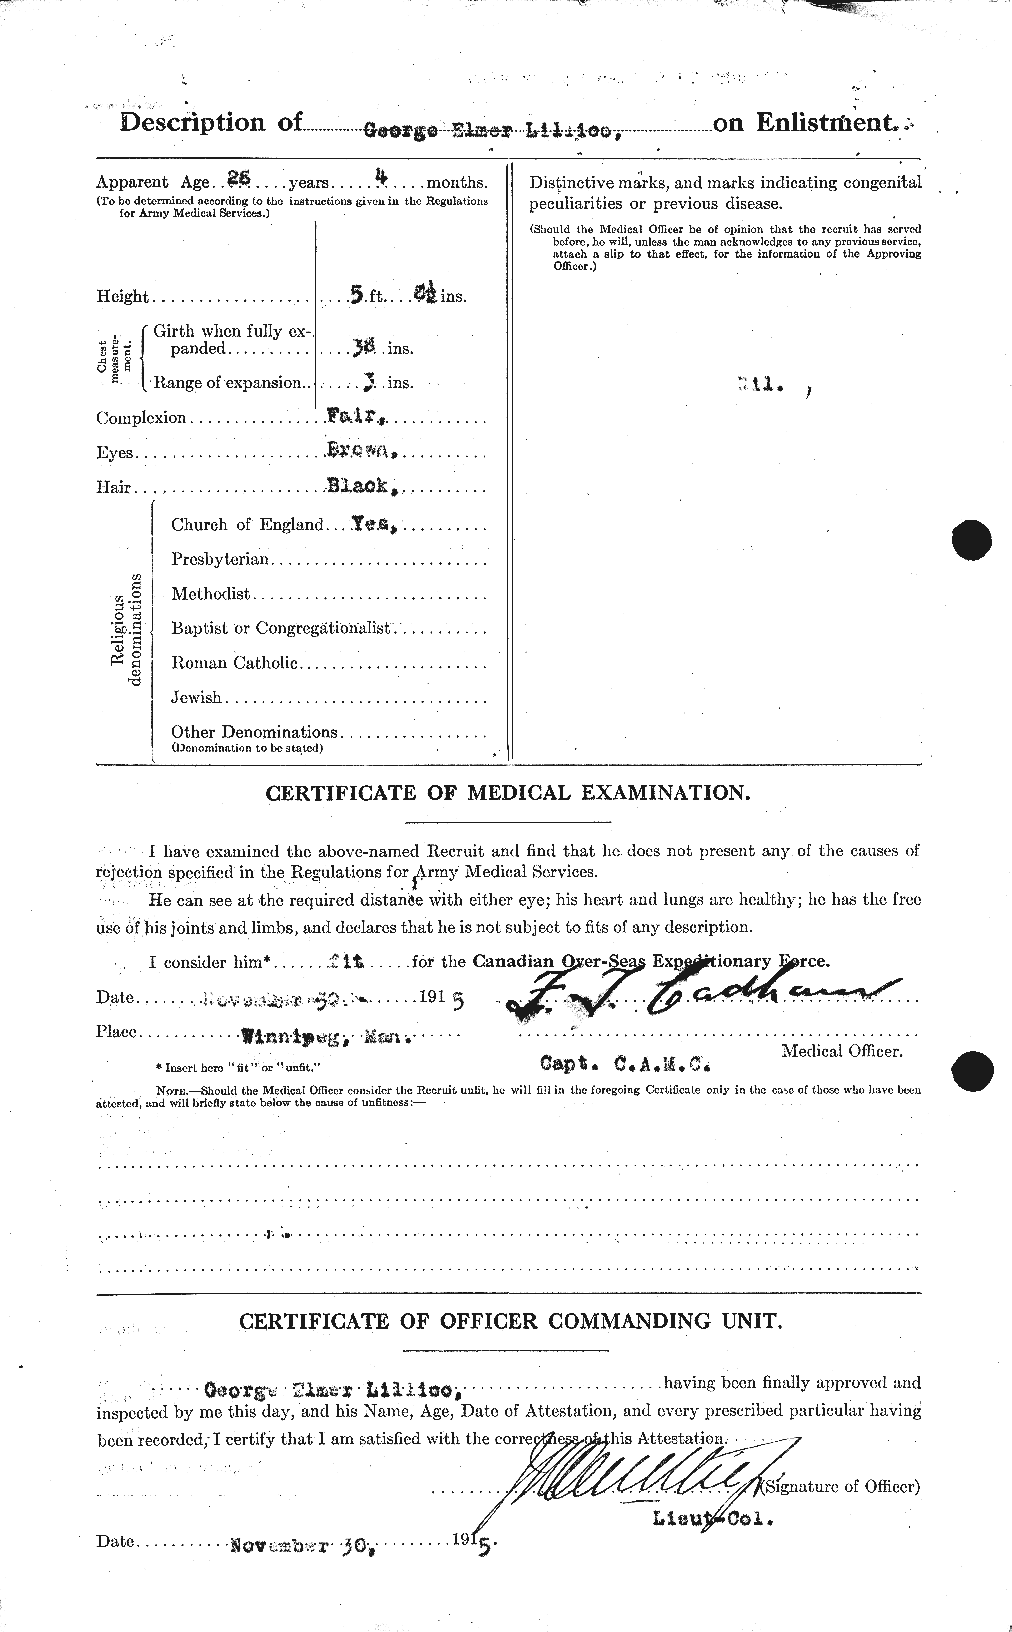 Personnel Records of the First World War - CEF 467455b